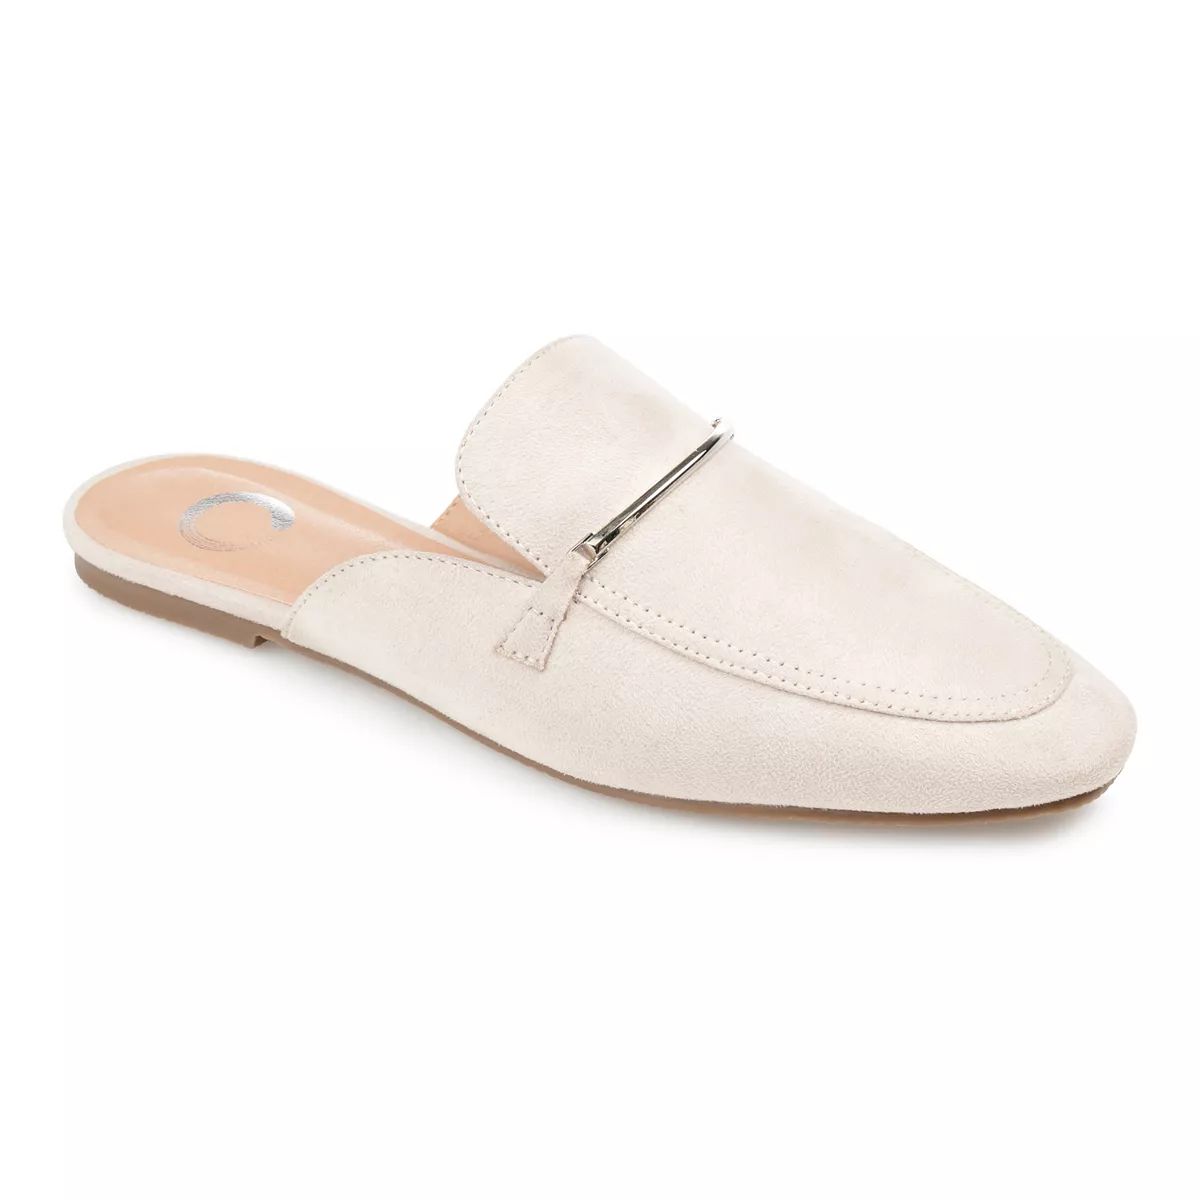 Journee Collection Ameena Women's Mules | Kohl's